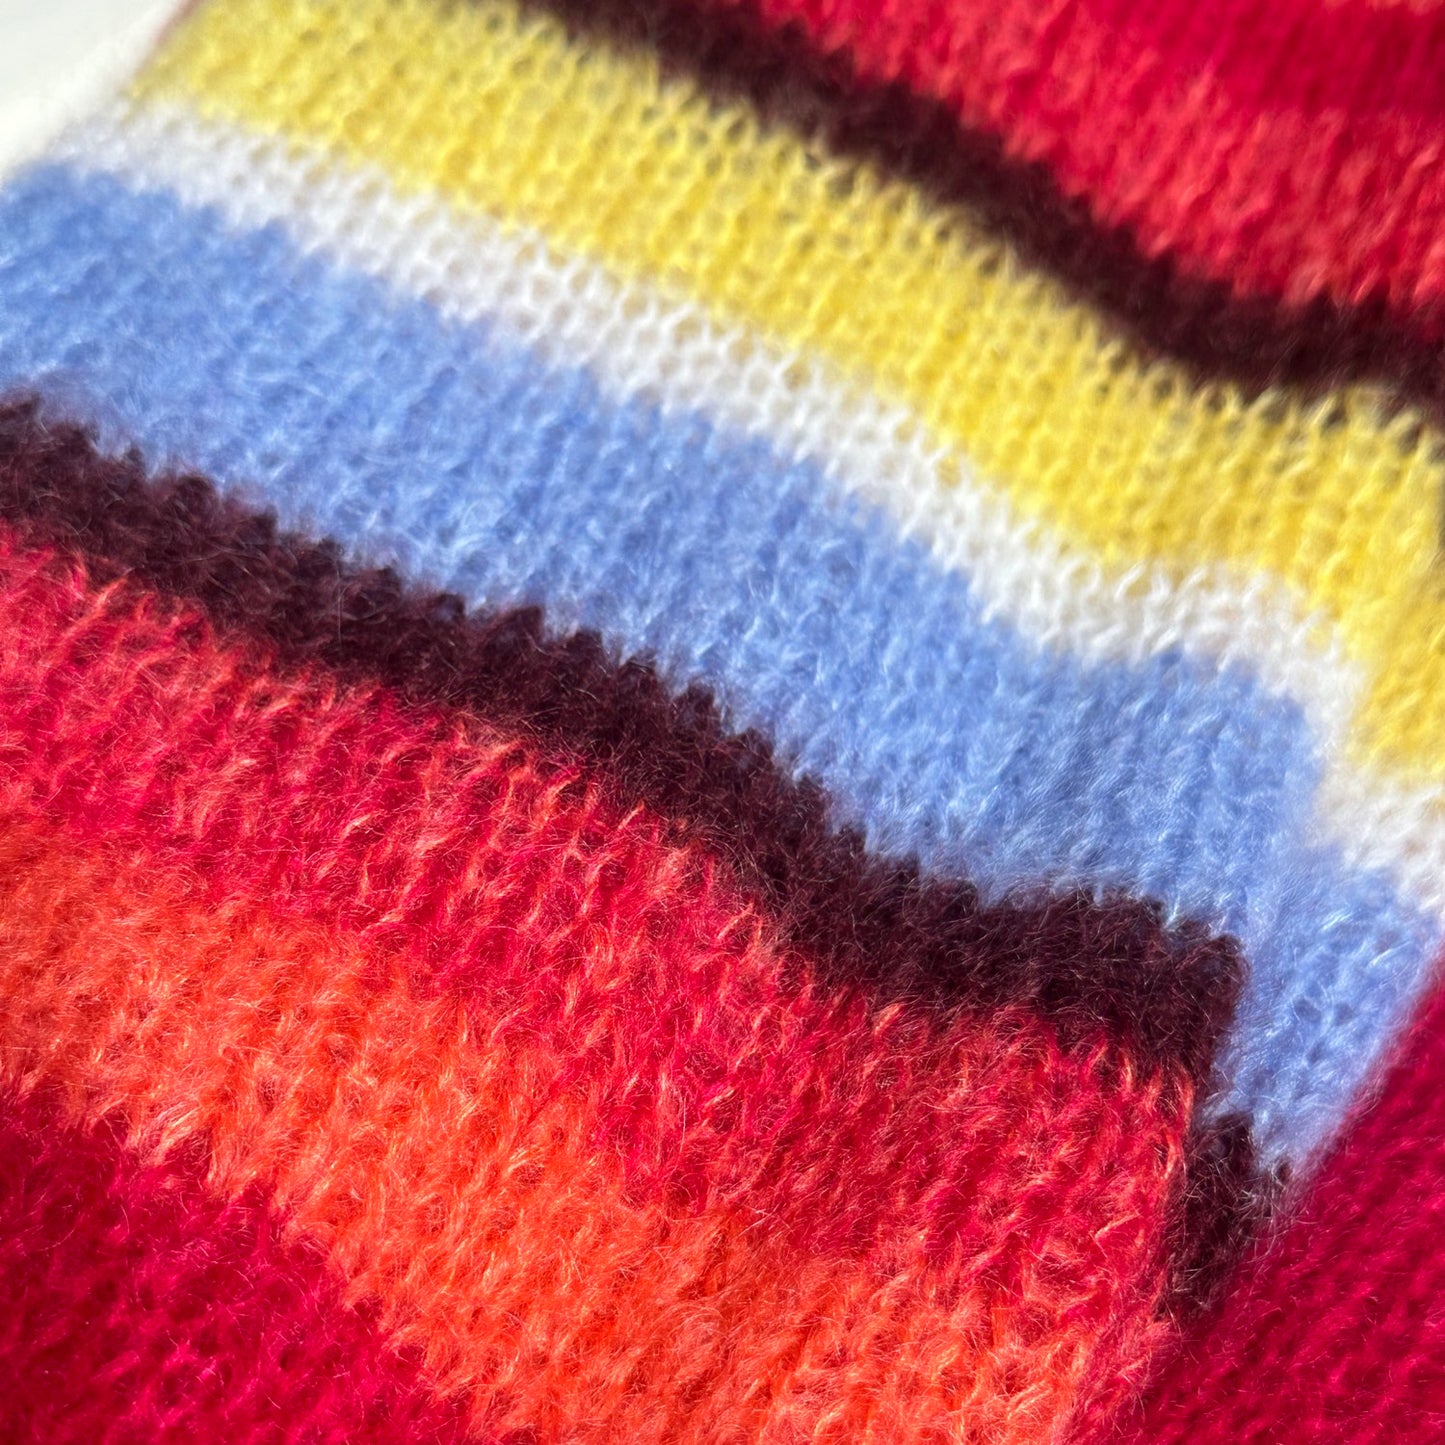 Striped sleeve detail on a hand-knitted jacket